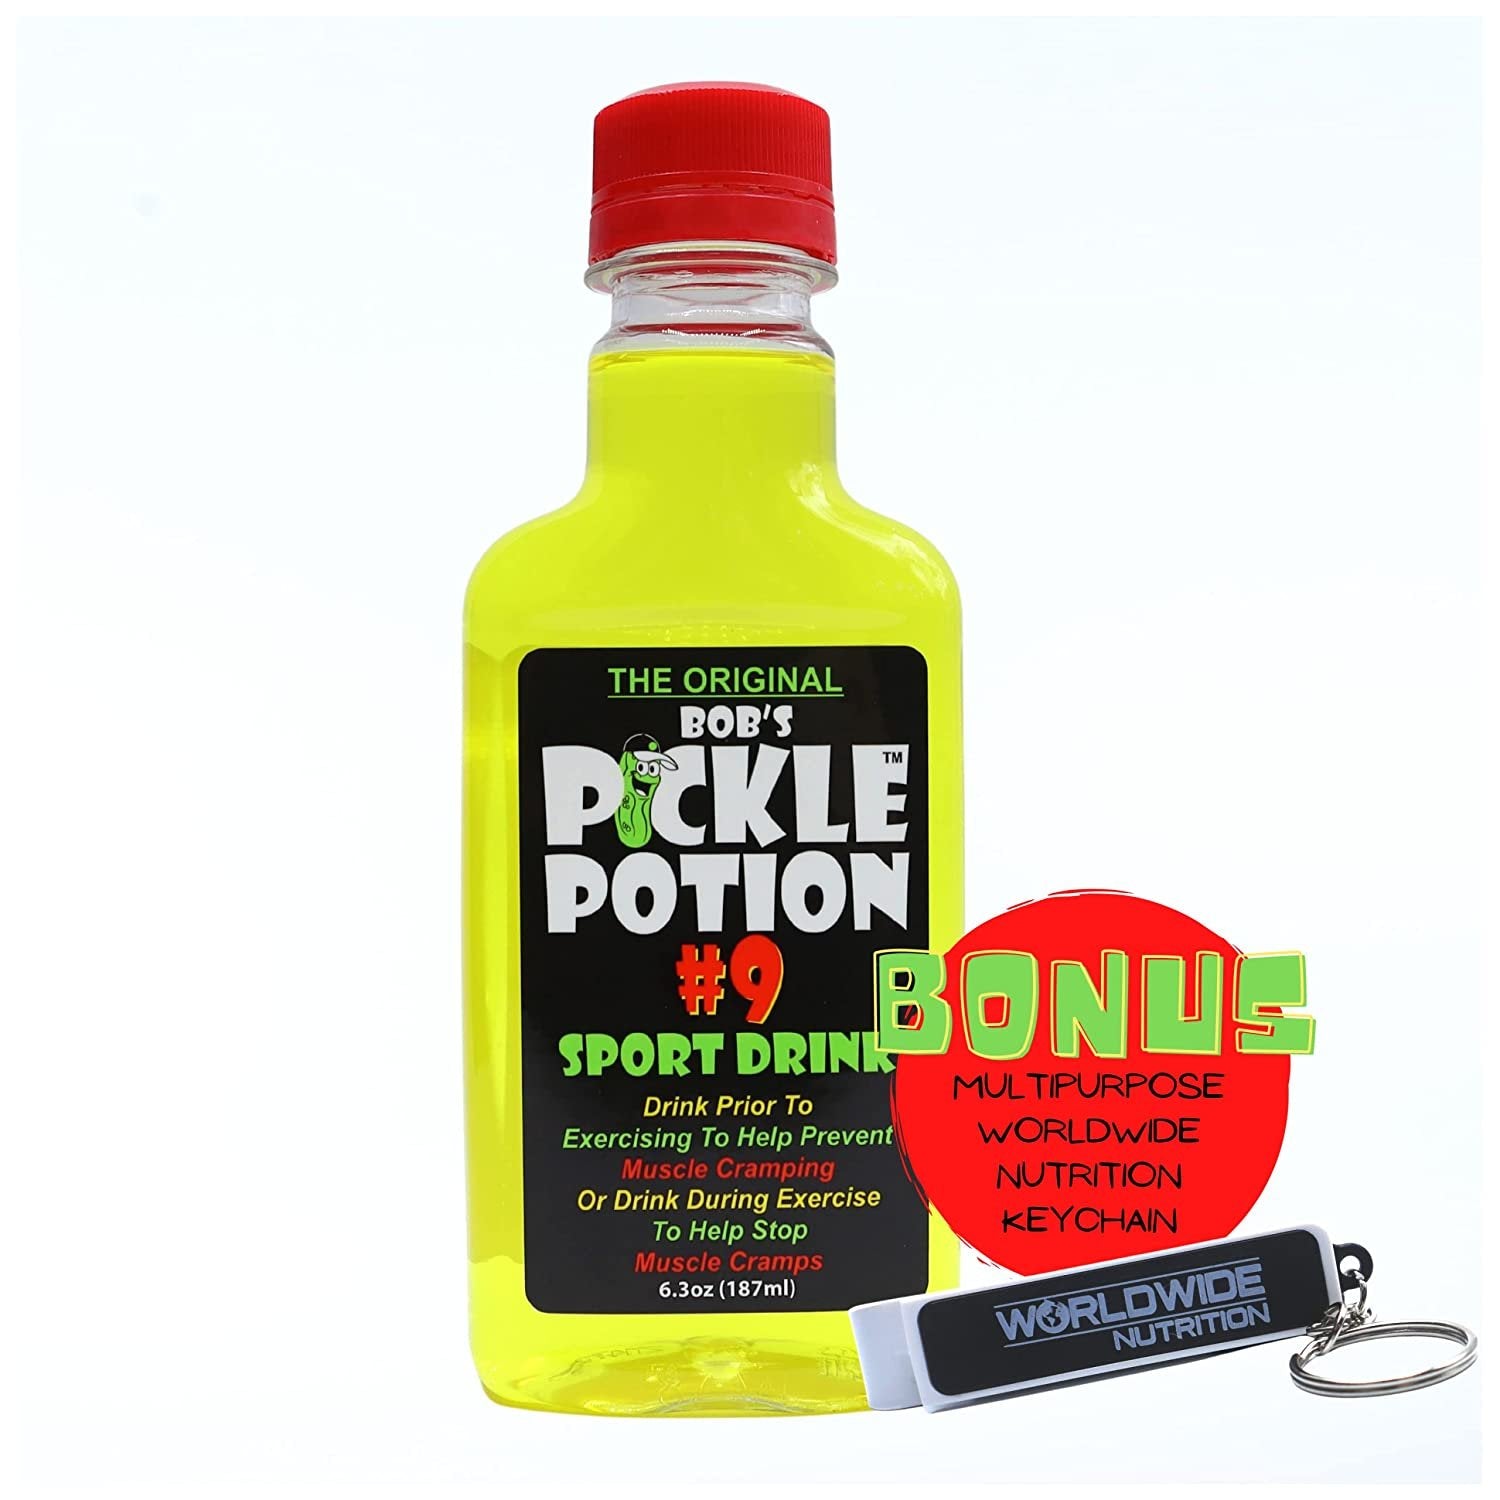 Bob's Pickle Potion 9 Sports Drinks - Electrolyte Drink for Pre Workout or Post Workout - Prime Hydration Drink for Leg Cramp Relief - 6.3 Oz 187ml Individual Pickle Juice Bottle with Bonus Key Chain